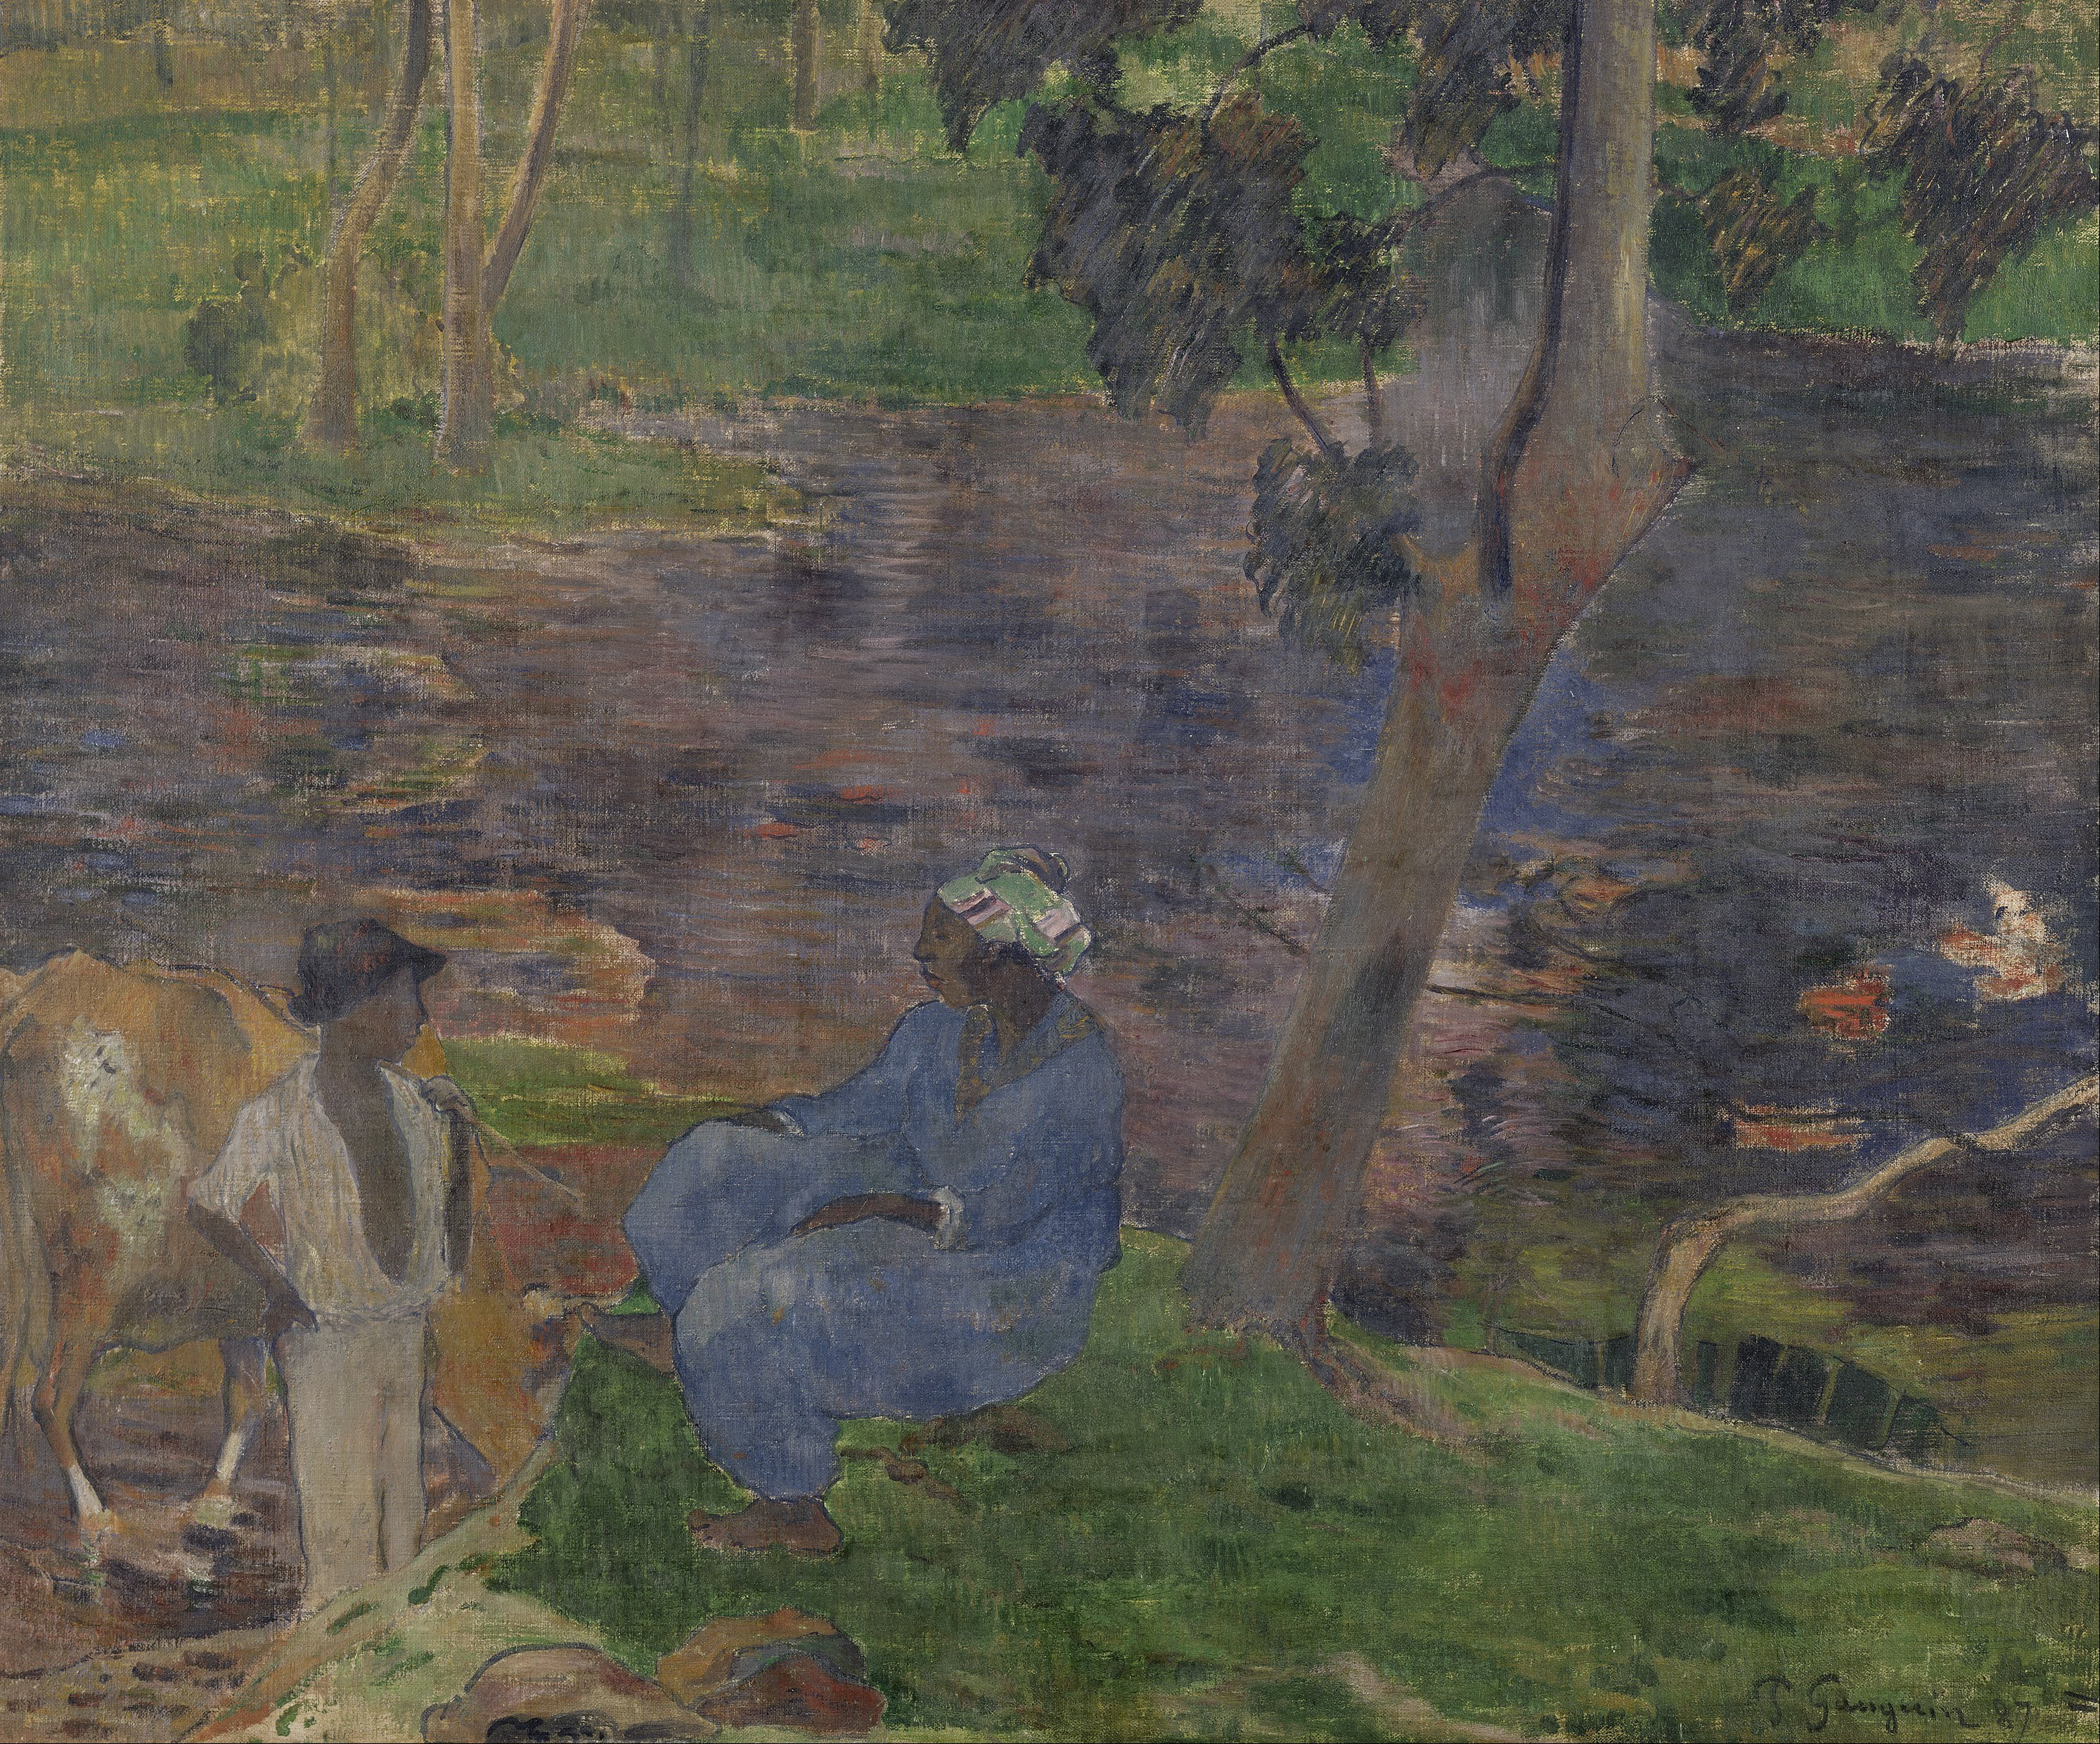 Paul Gauguin - On the shore of the lake at Martinique - Google Art Project